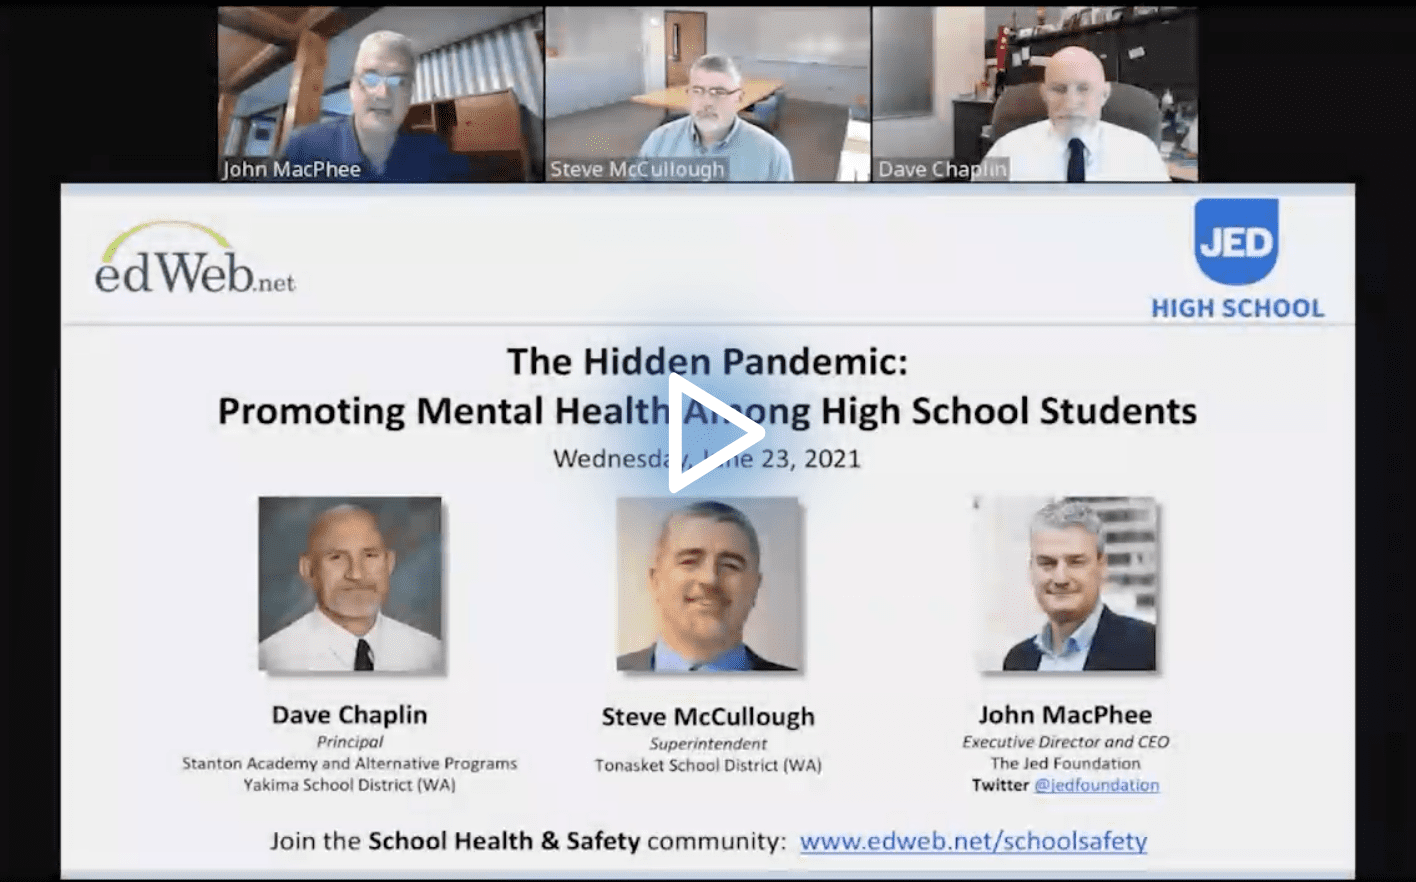 The Hidden Pandemic: Promoting Mental Health Among High School Students edLeader Panel recording link